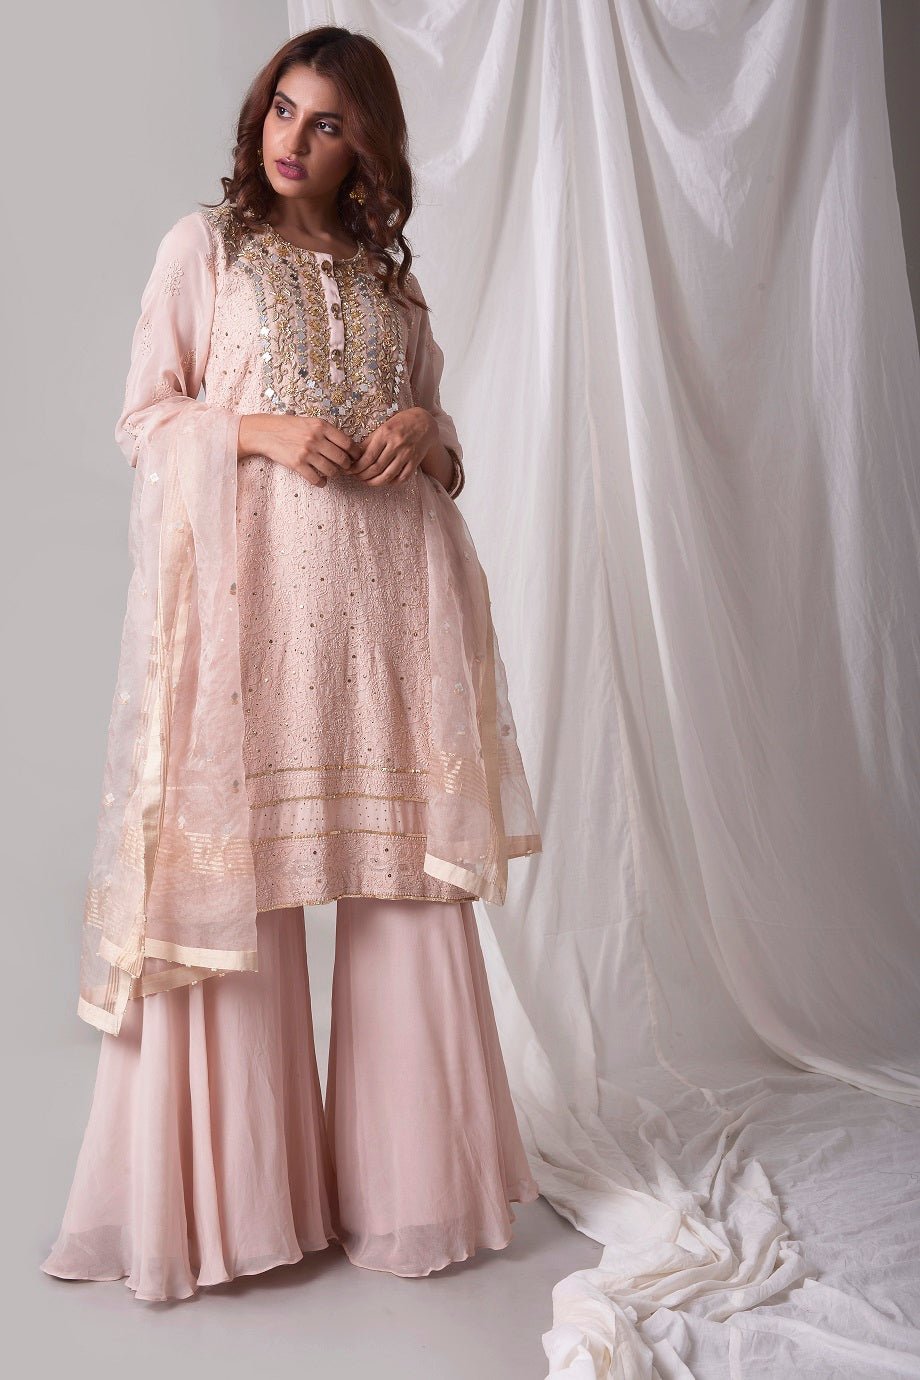 Buy powder pink georgette suit online in USA. Be the talk of parties and weddings with exquisite designer gowns, Indian suits, Anarkali dresses, Indo-western dresses from Pure Elegance Indian clothing store in USA .Shop online now..-full view-5